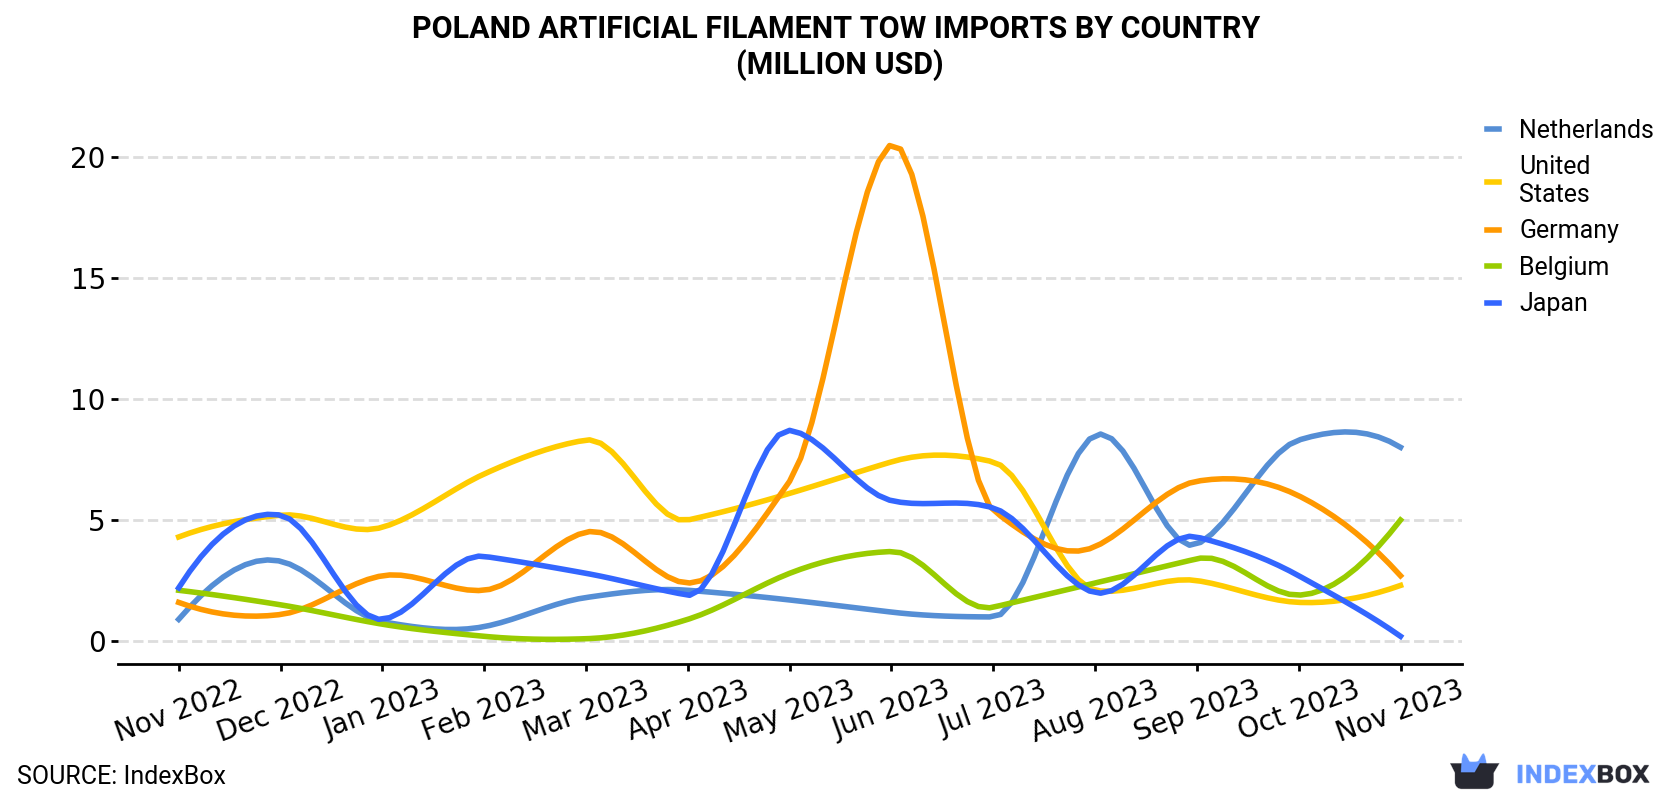 Poland Artificial Filament Tow Imports By Country (Million USD)